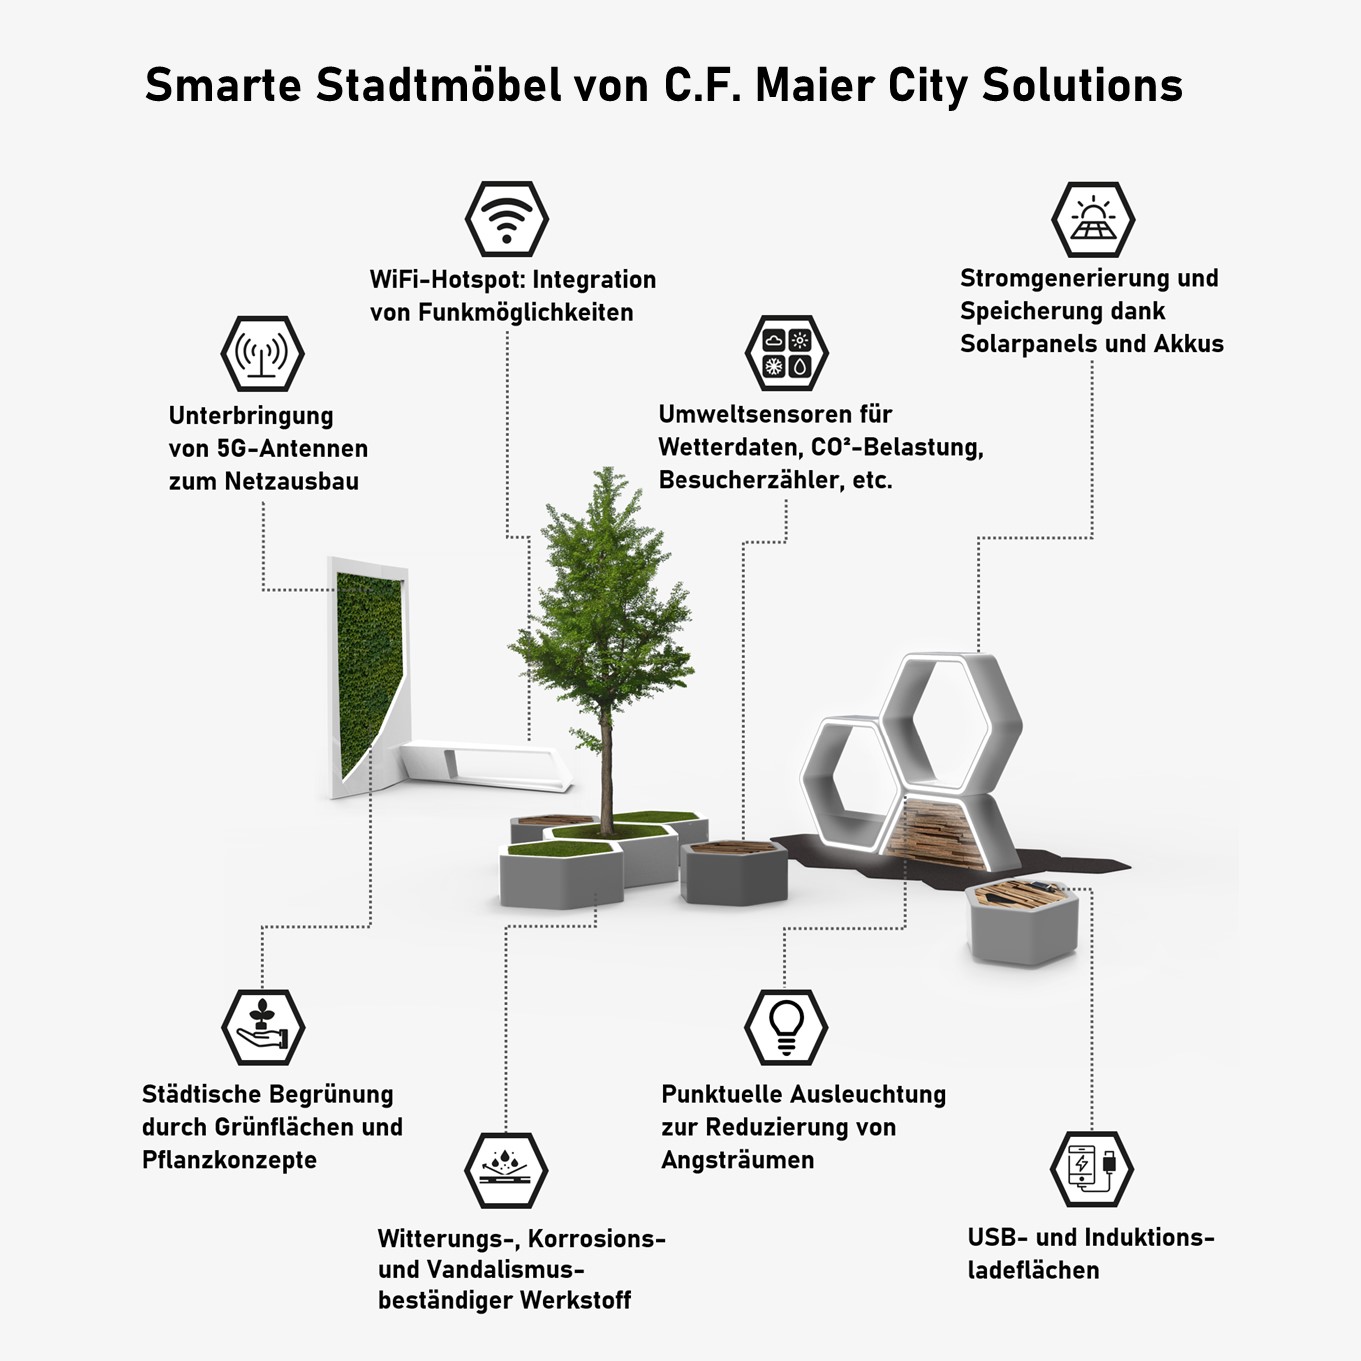 The smart street furniture concept by C.F. Maier City Solutions